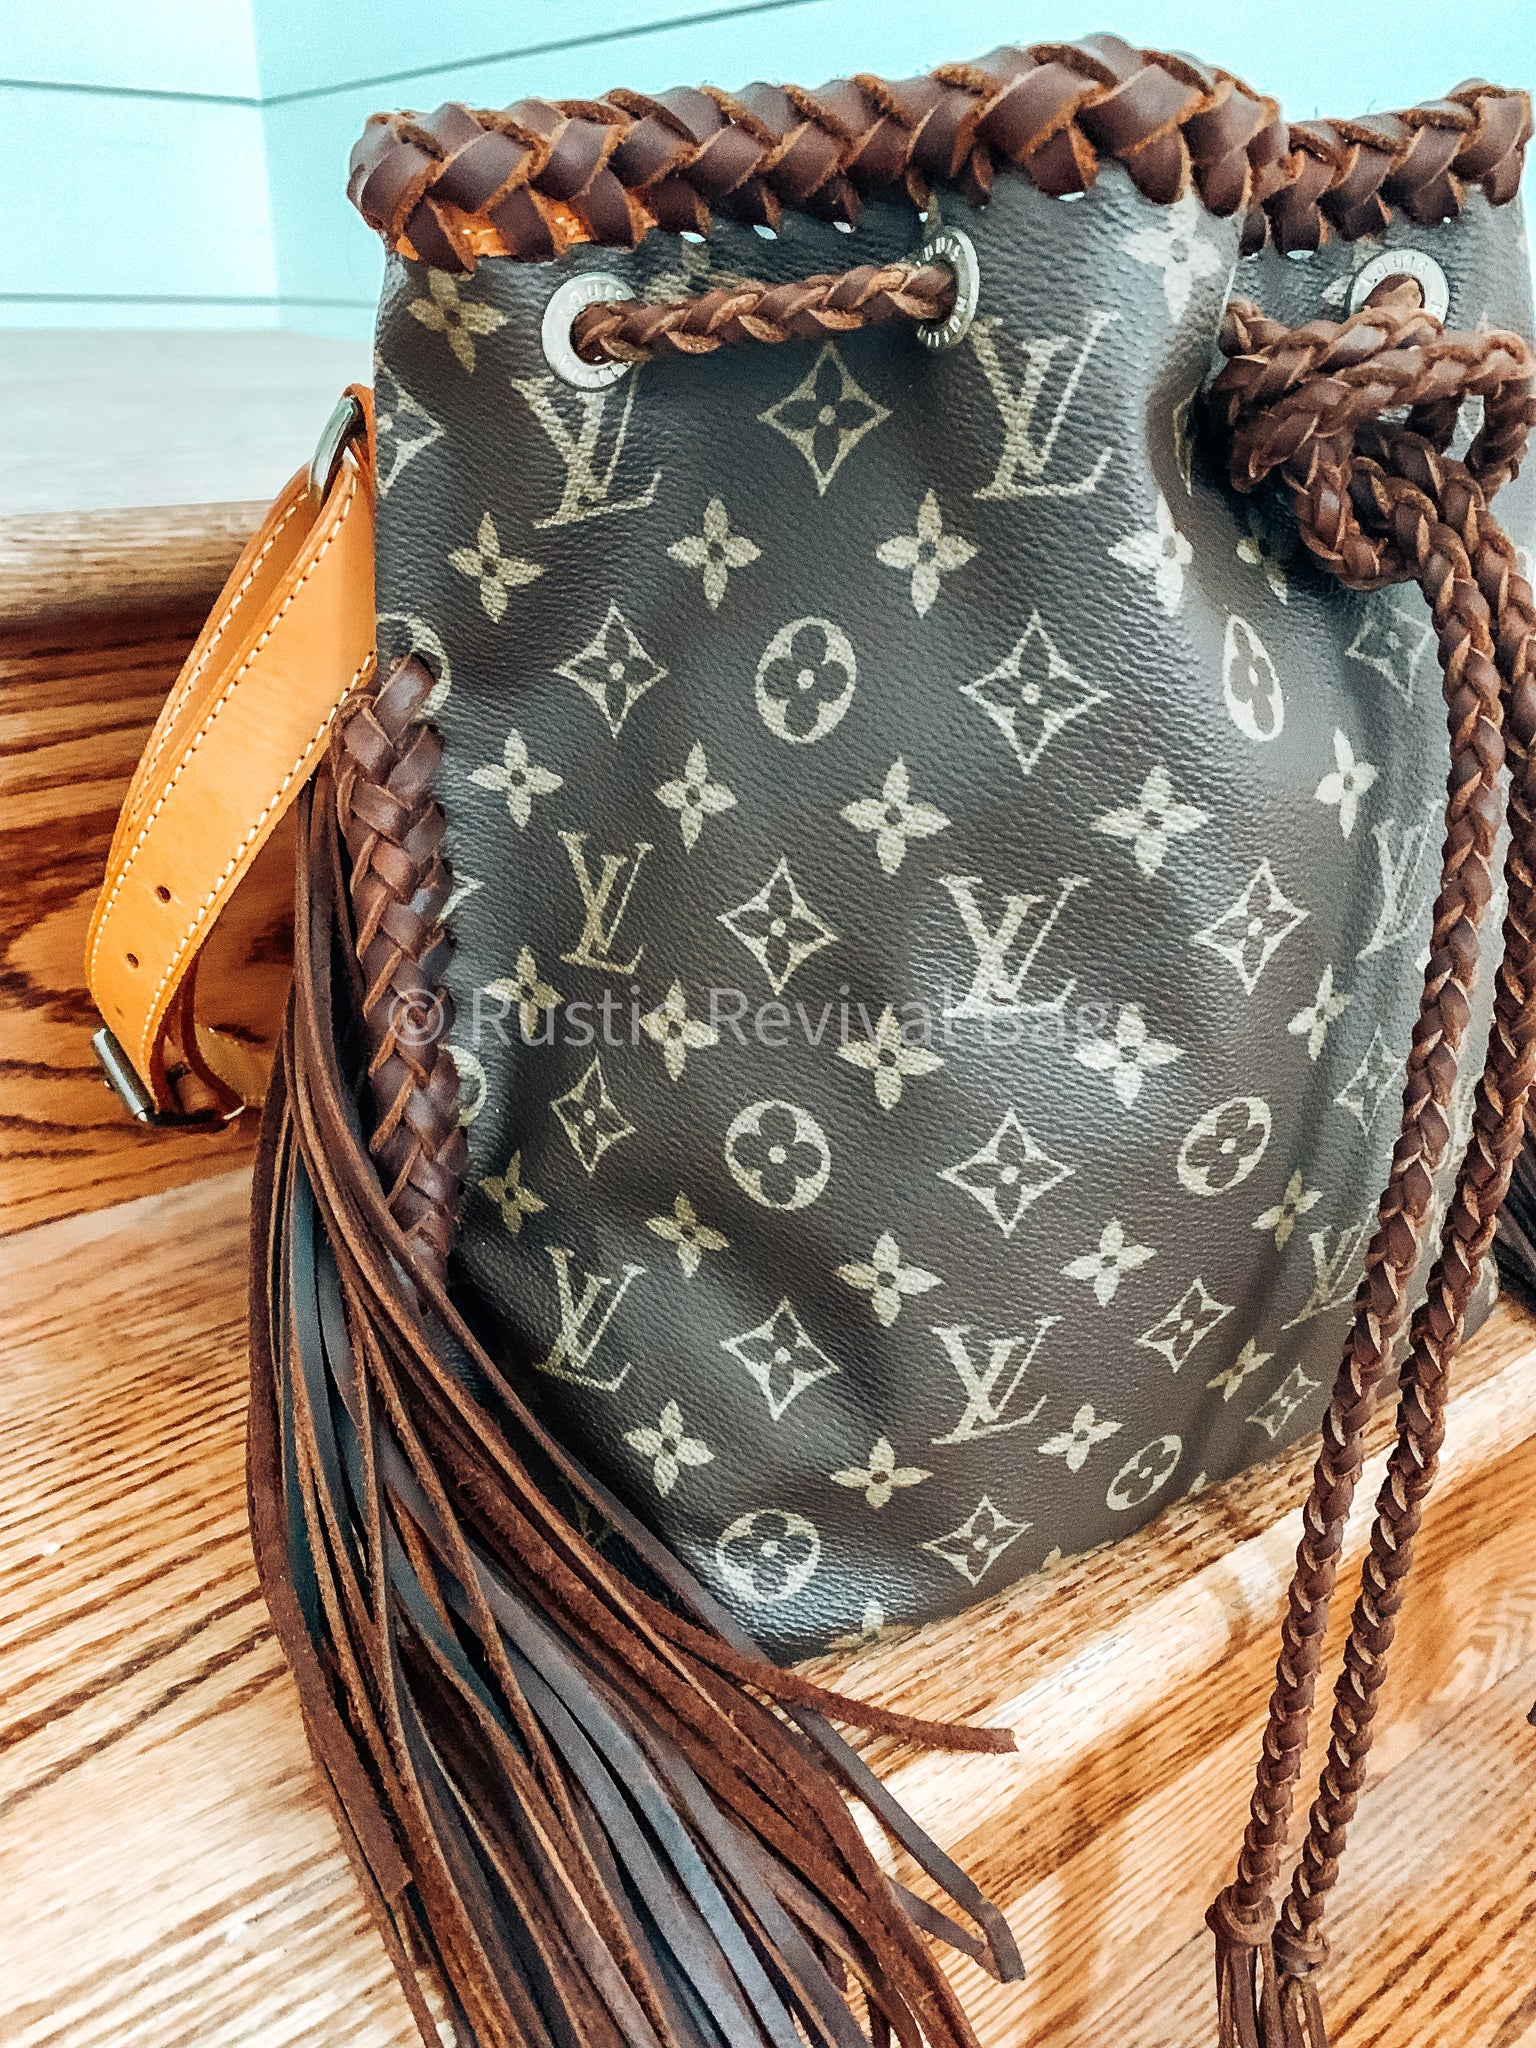 Louis Vuitton Bag With Braided Handle